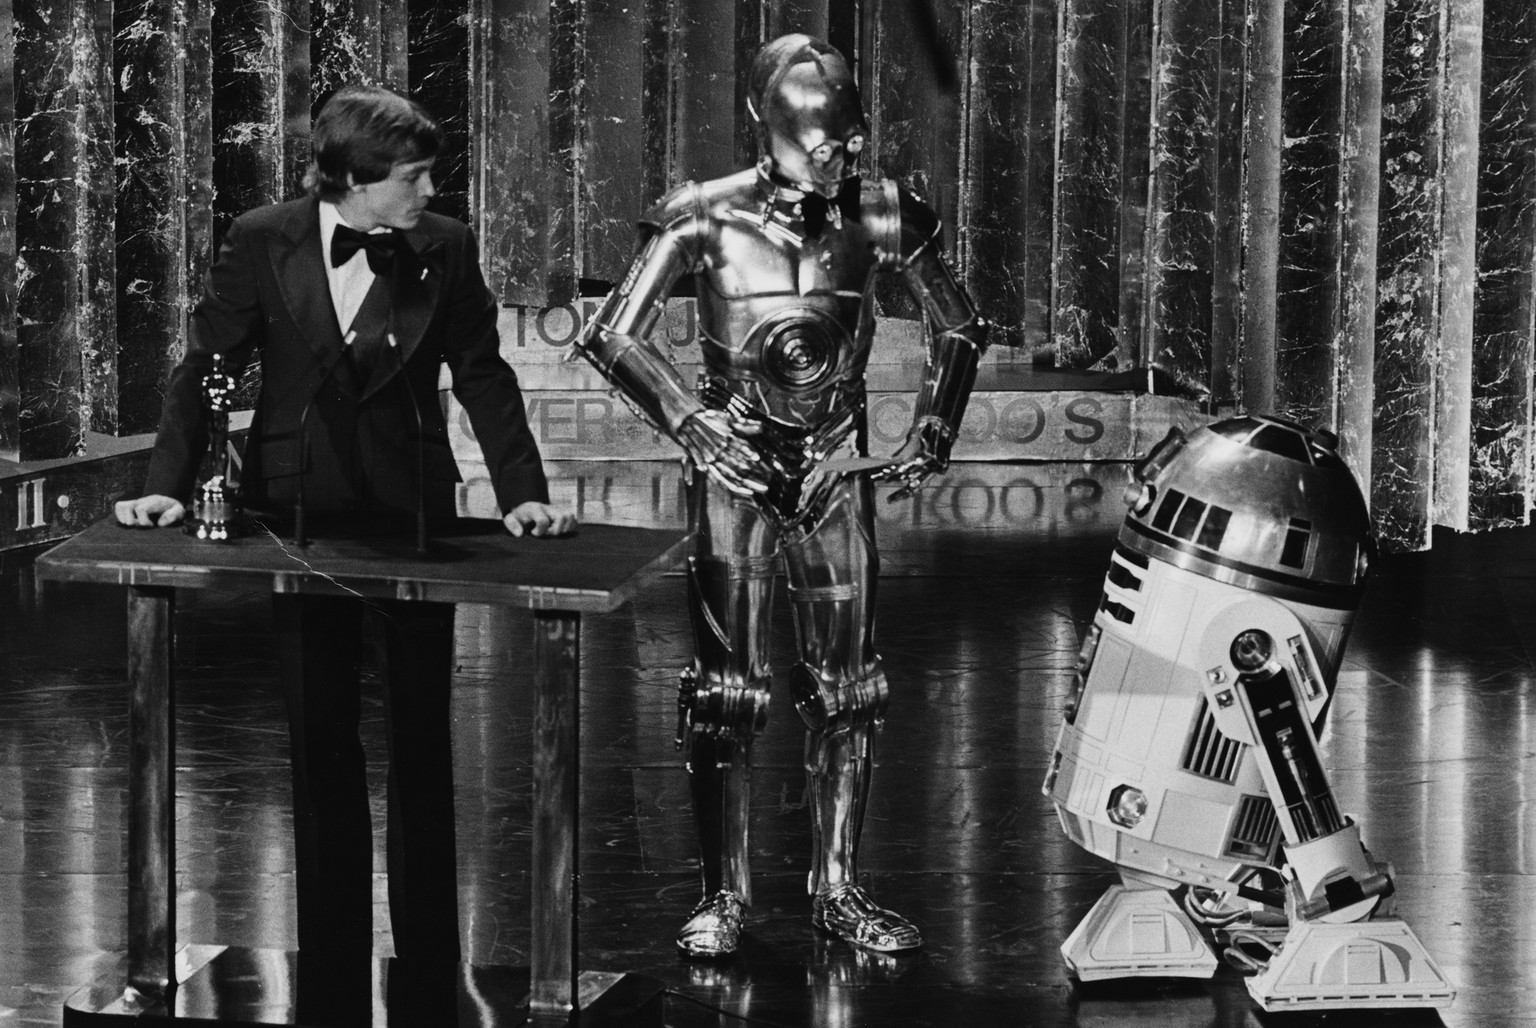 Mark Hamill
Actor Mark Hamill presenting an award with his Star Wars co-stars C3PO and R2D2, at the 50th Academy Awards, Los Angeles, April 3rd 1978. (Photo by Archive Photos/Getty Images)